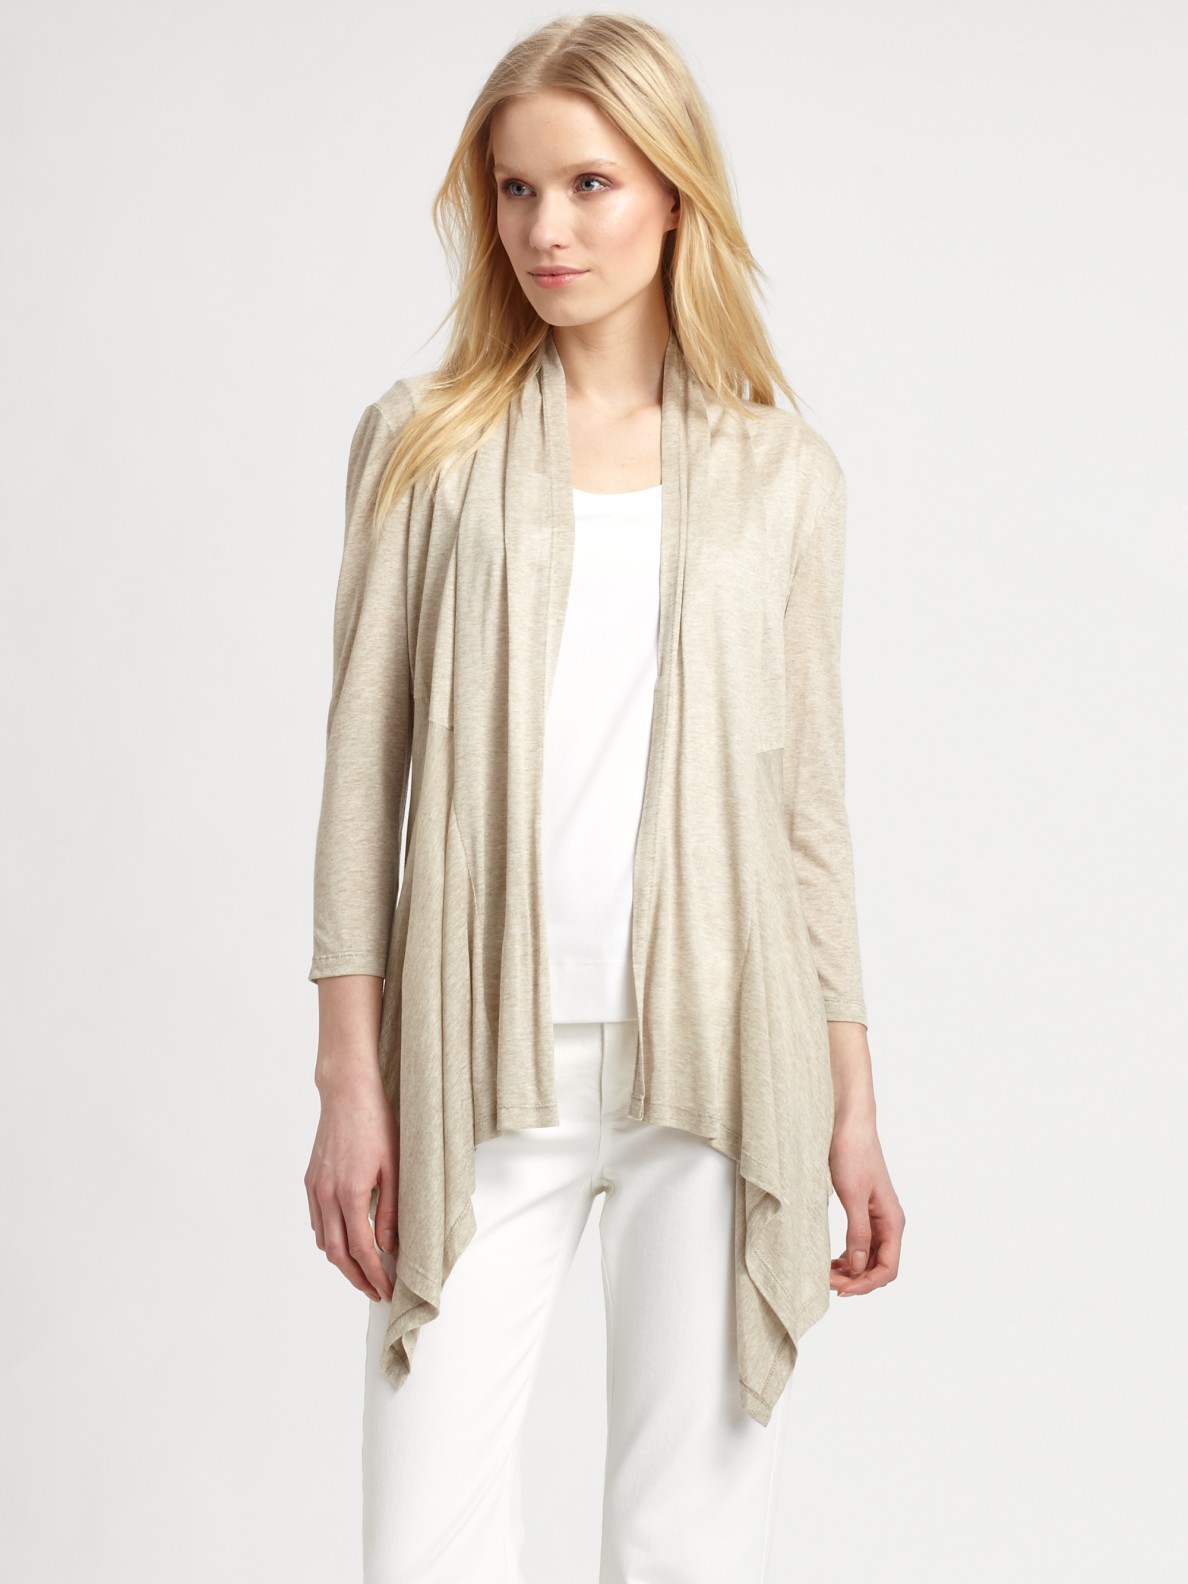 Lyst - Lafayette 148 New York Openfront Cascade Cardigan in Natural